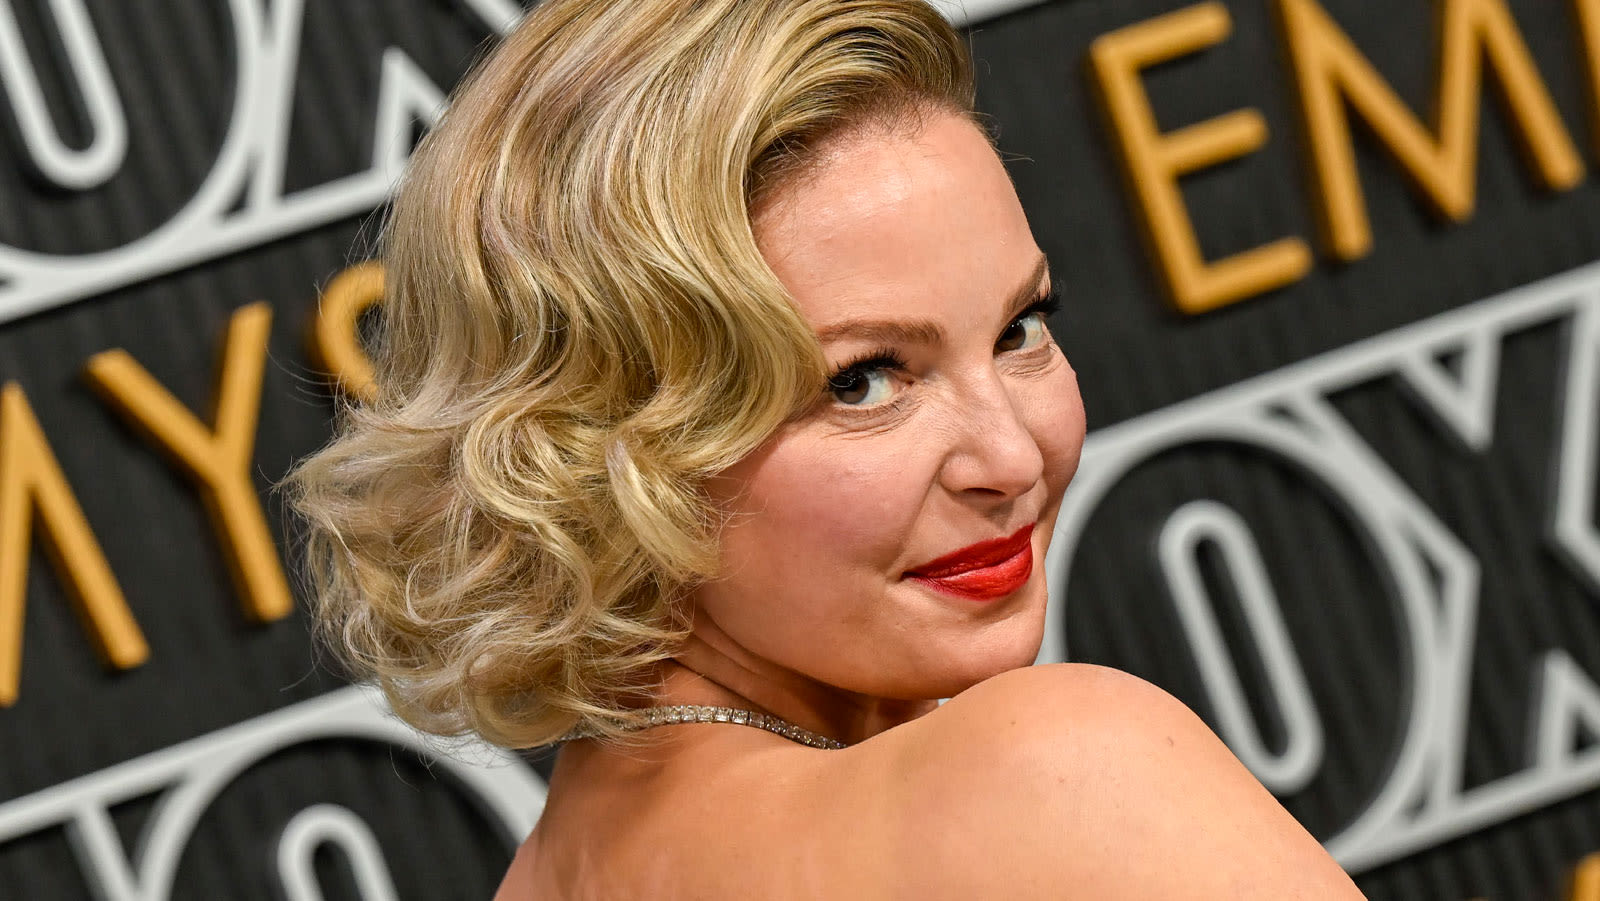 Katherine Heigl Clears Up Rumor She Turned Down ‘Grey’s Anatomy’ Emmy Nomination: “I Wasn’t Trying To Be A Dick”